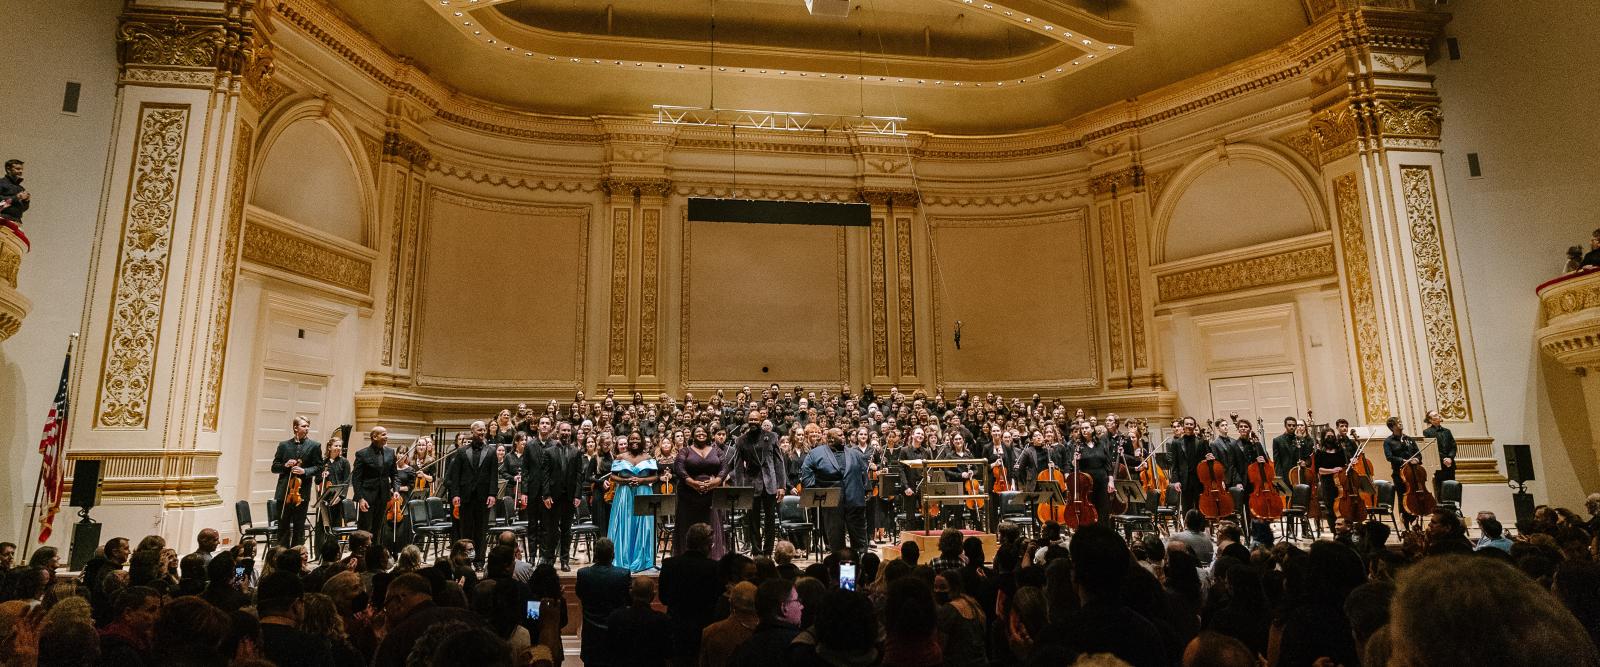 Oberlin Orchestra and choral ensembles on stage at Carnegie Hall.